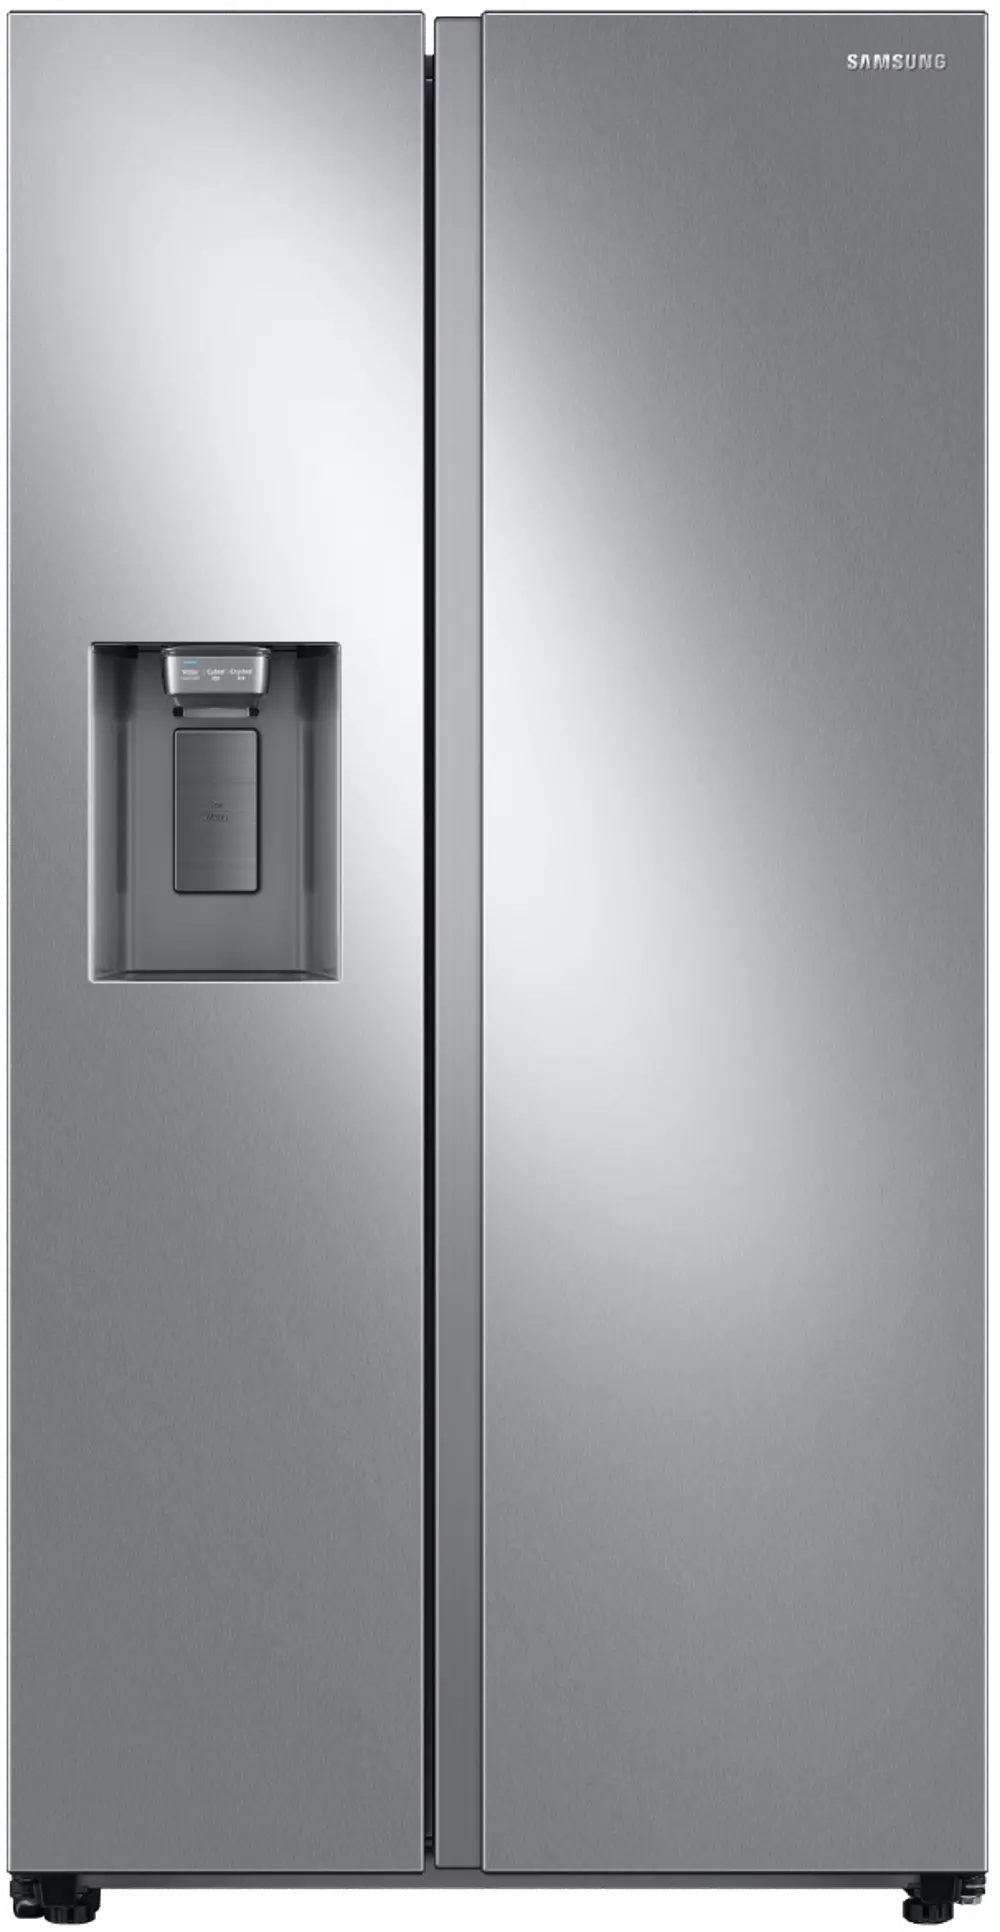 RS22T5201SR Samsung 22 cu ft Side by Side Refrigerator - Counter Depth Stainless Steel-1